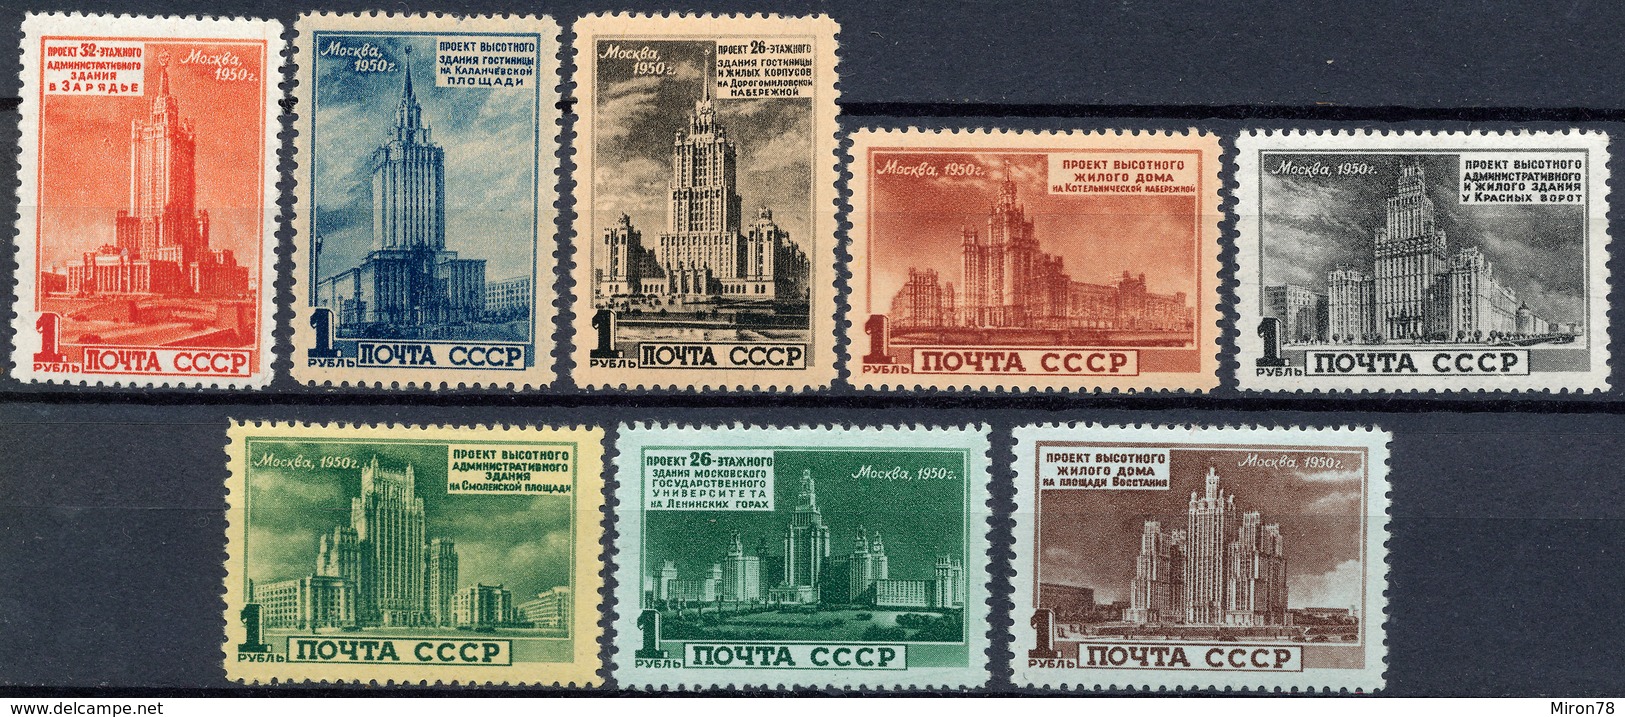 Stamps RUSSIA 1951 SKYSCRAPERS PLANNED FOR MOSCOW MNH - Unused Stamps